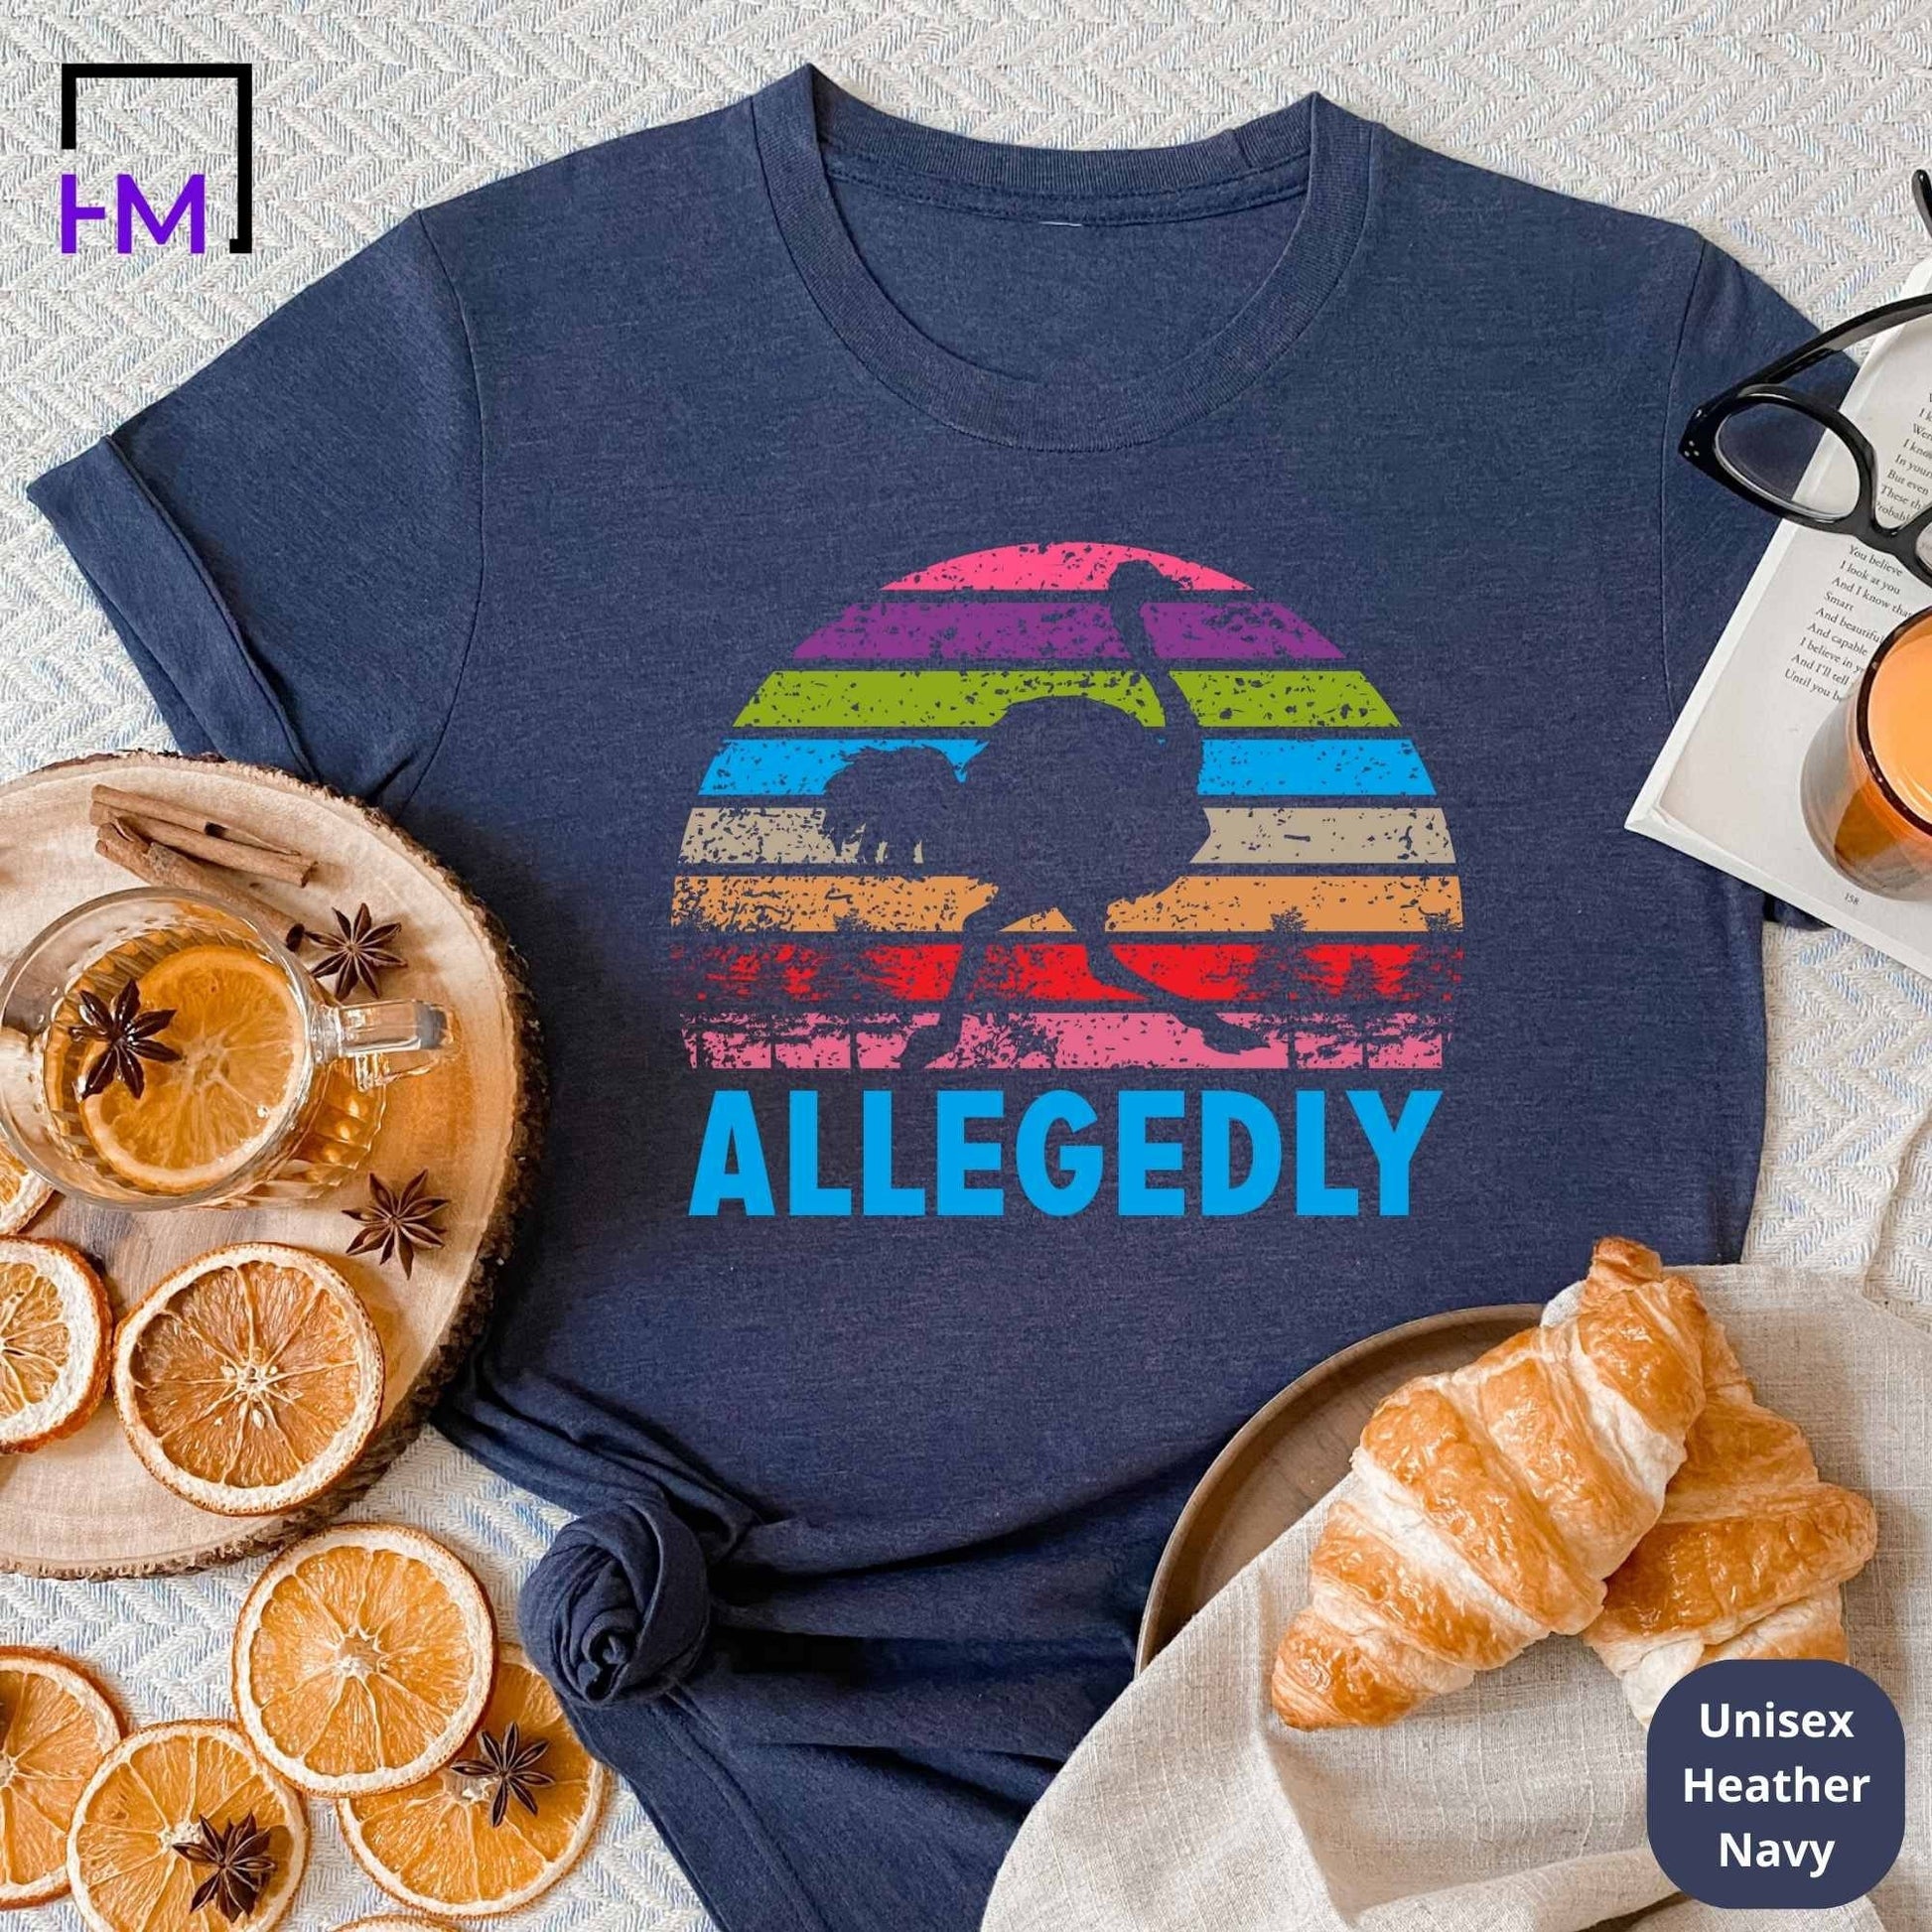 Allegedly Shirt, Allegedly Ostrich, Allegedly Black T-Shirt, Valentines Day Shirt, Gift for Valentines, Gift For Husband, Fathers Day Gift T HMDesignStudioUS